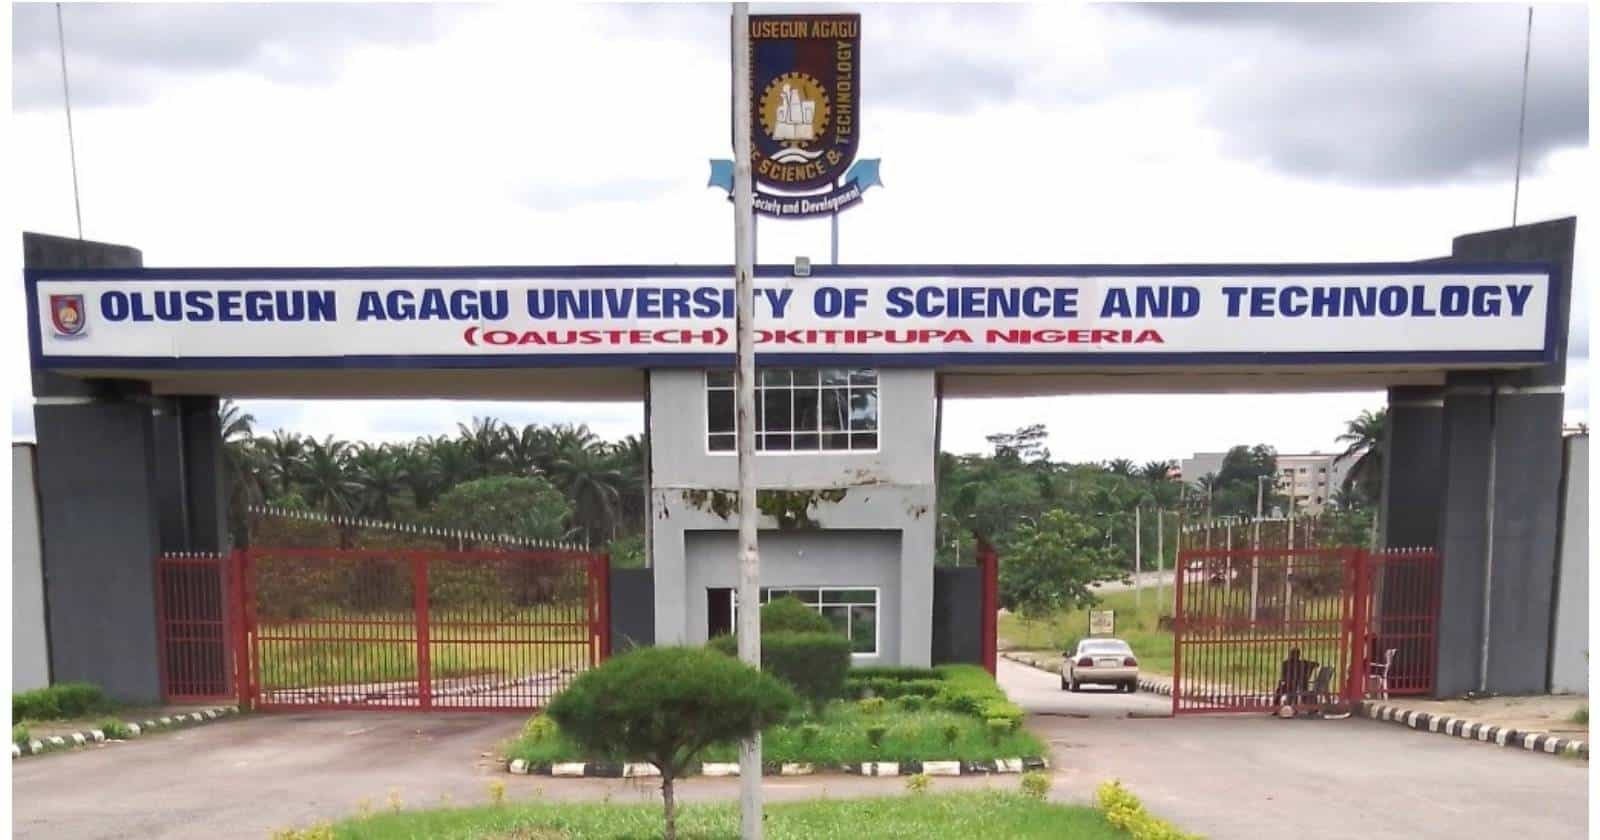 Olusegun Agagu University of Science and Technology (OAUSTECH) Convocation Ceremony